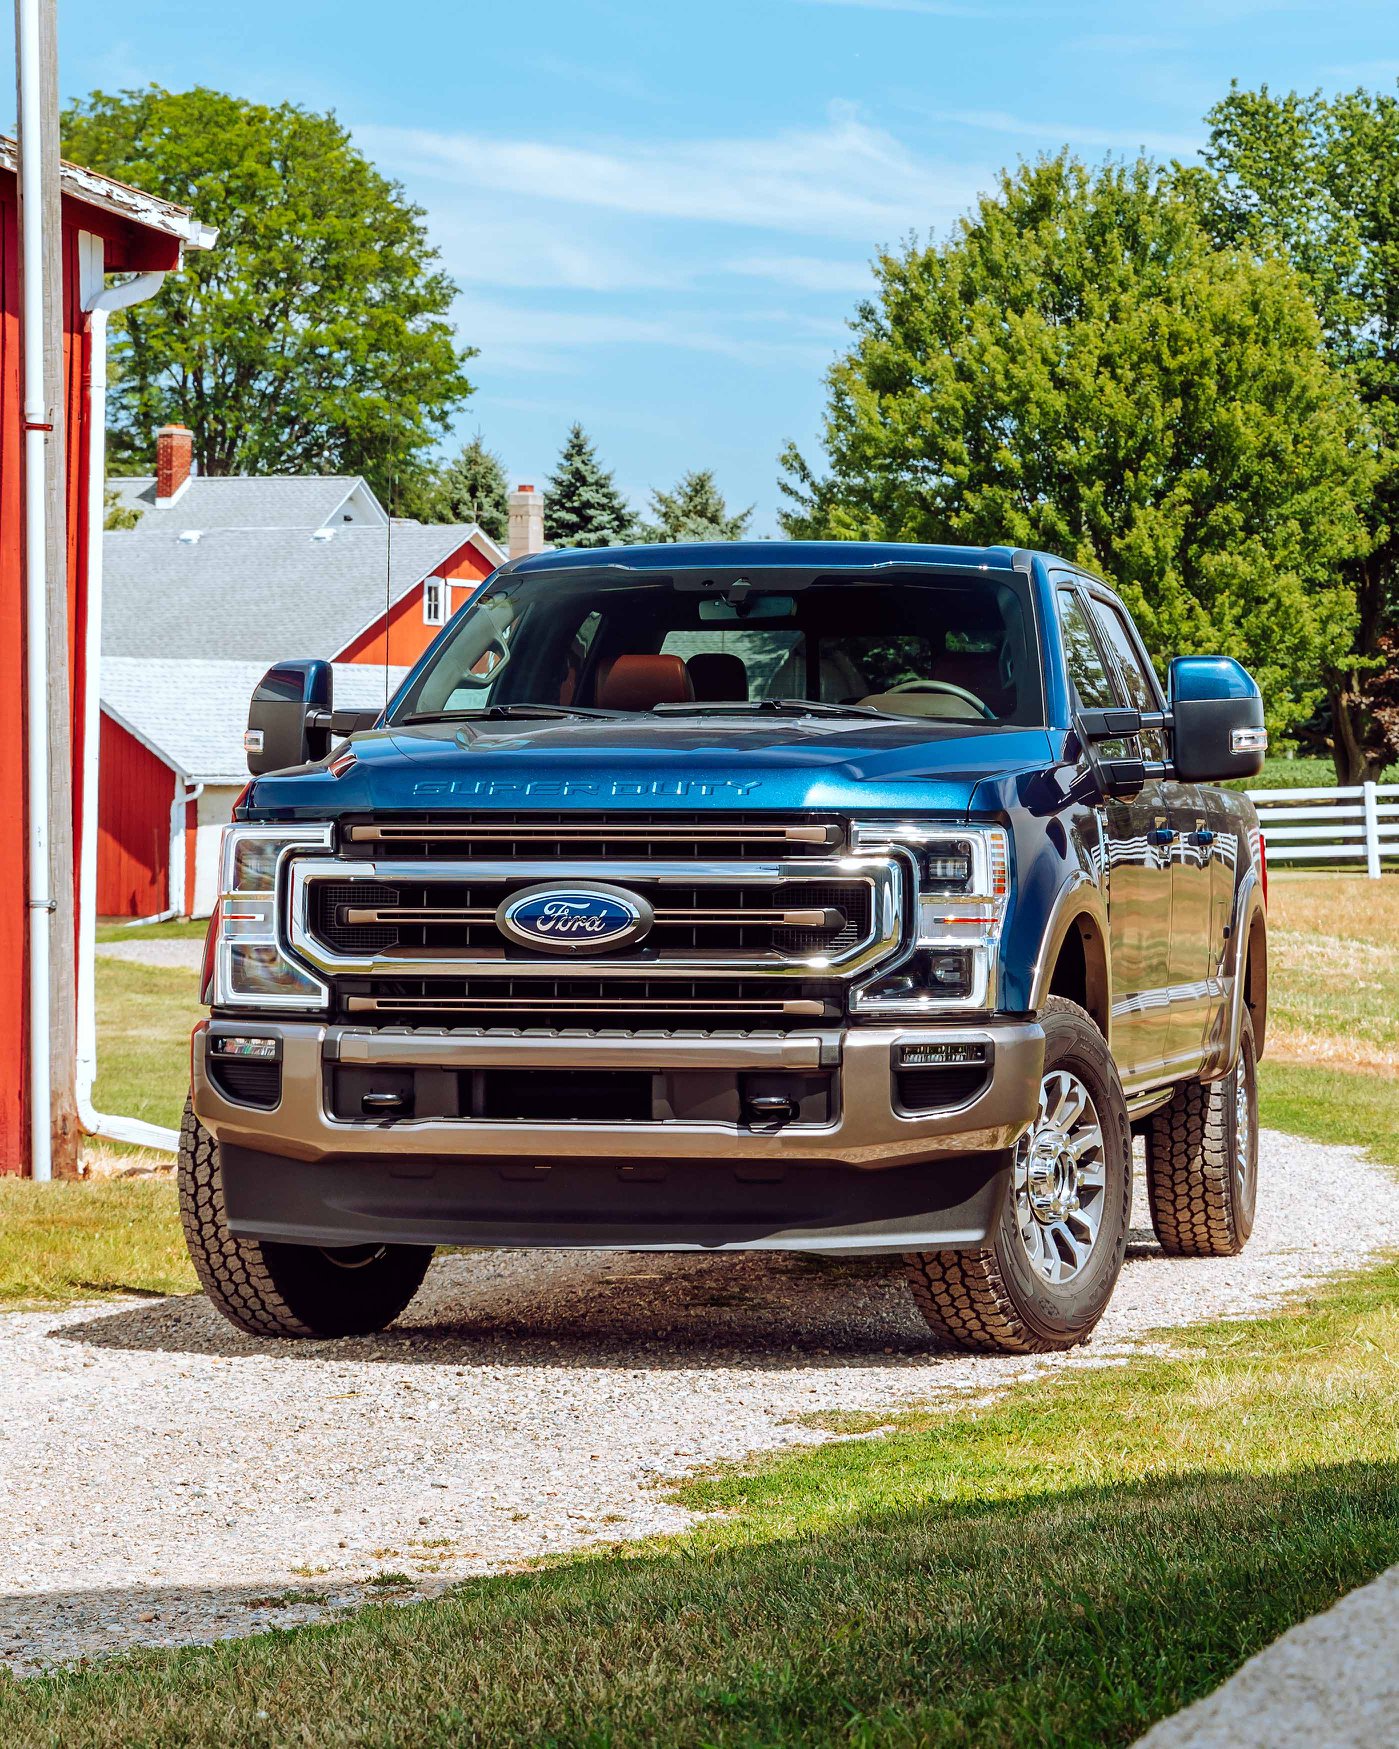 Best-in-Class Towing on the 2021 Super Duty Ford Truck at Bill Brown Ford